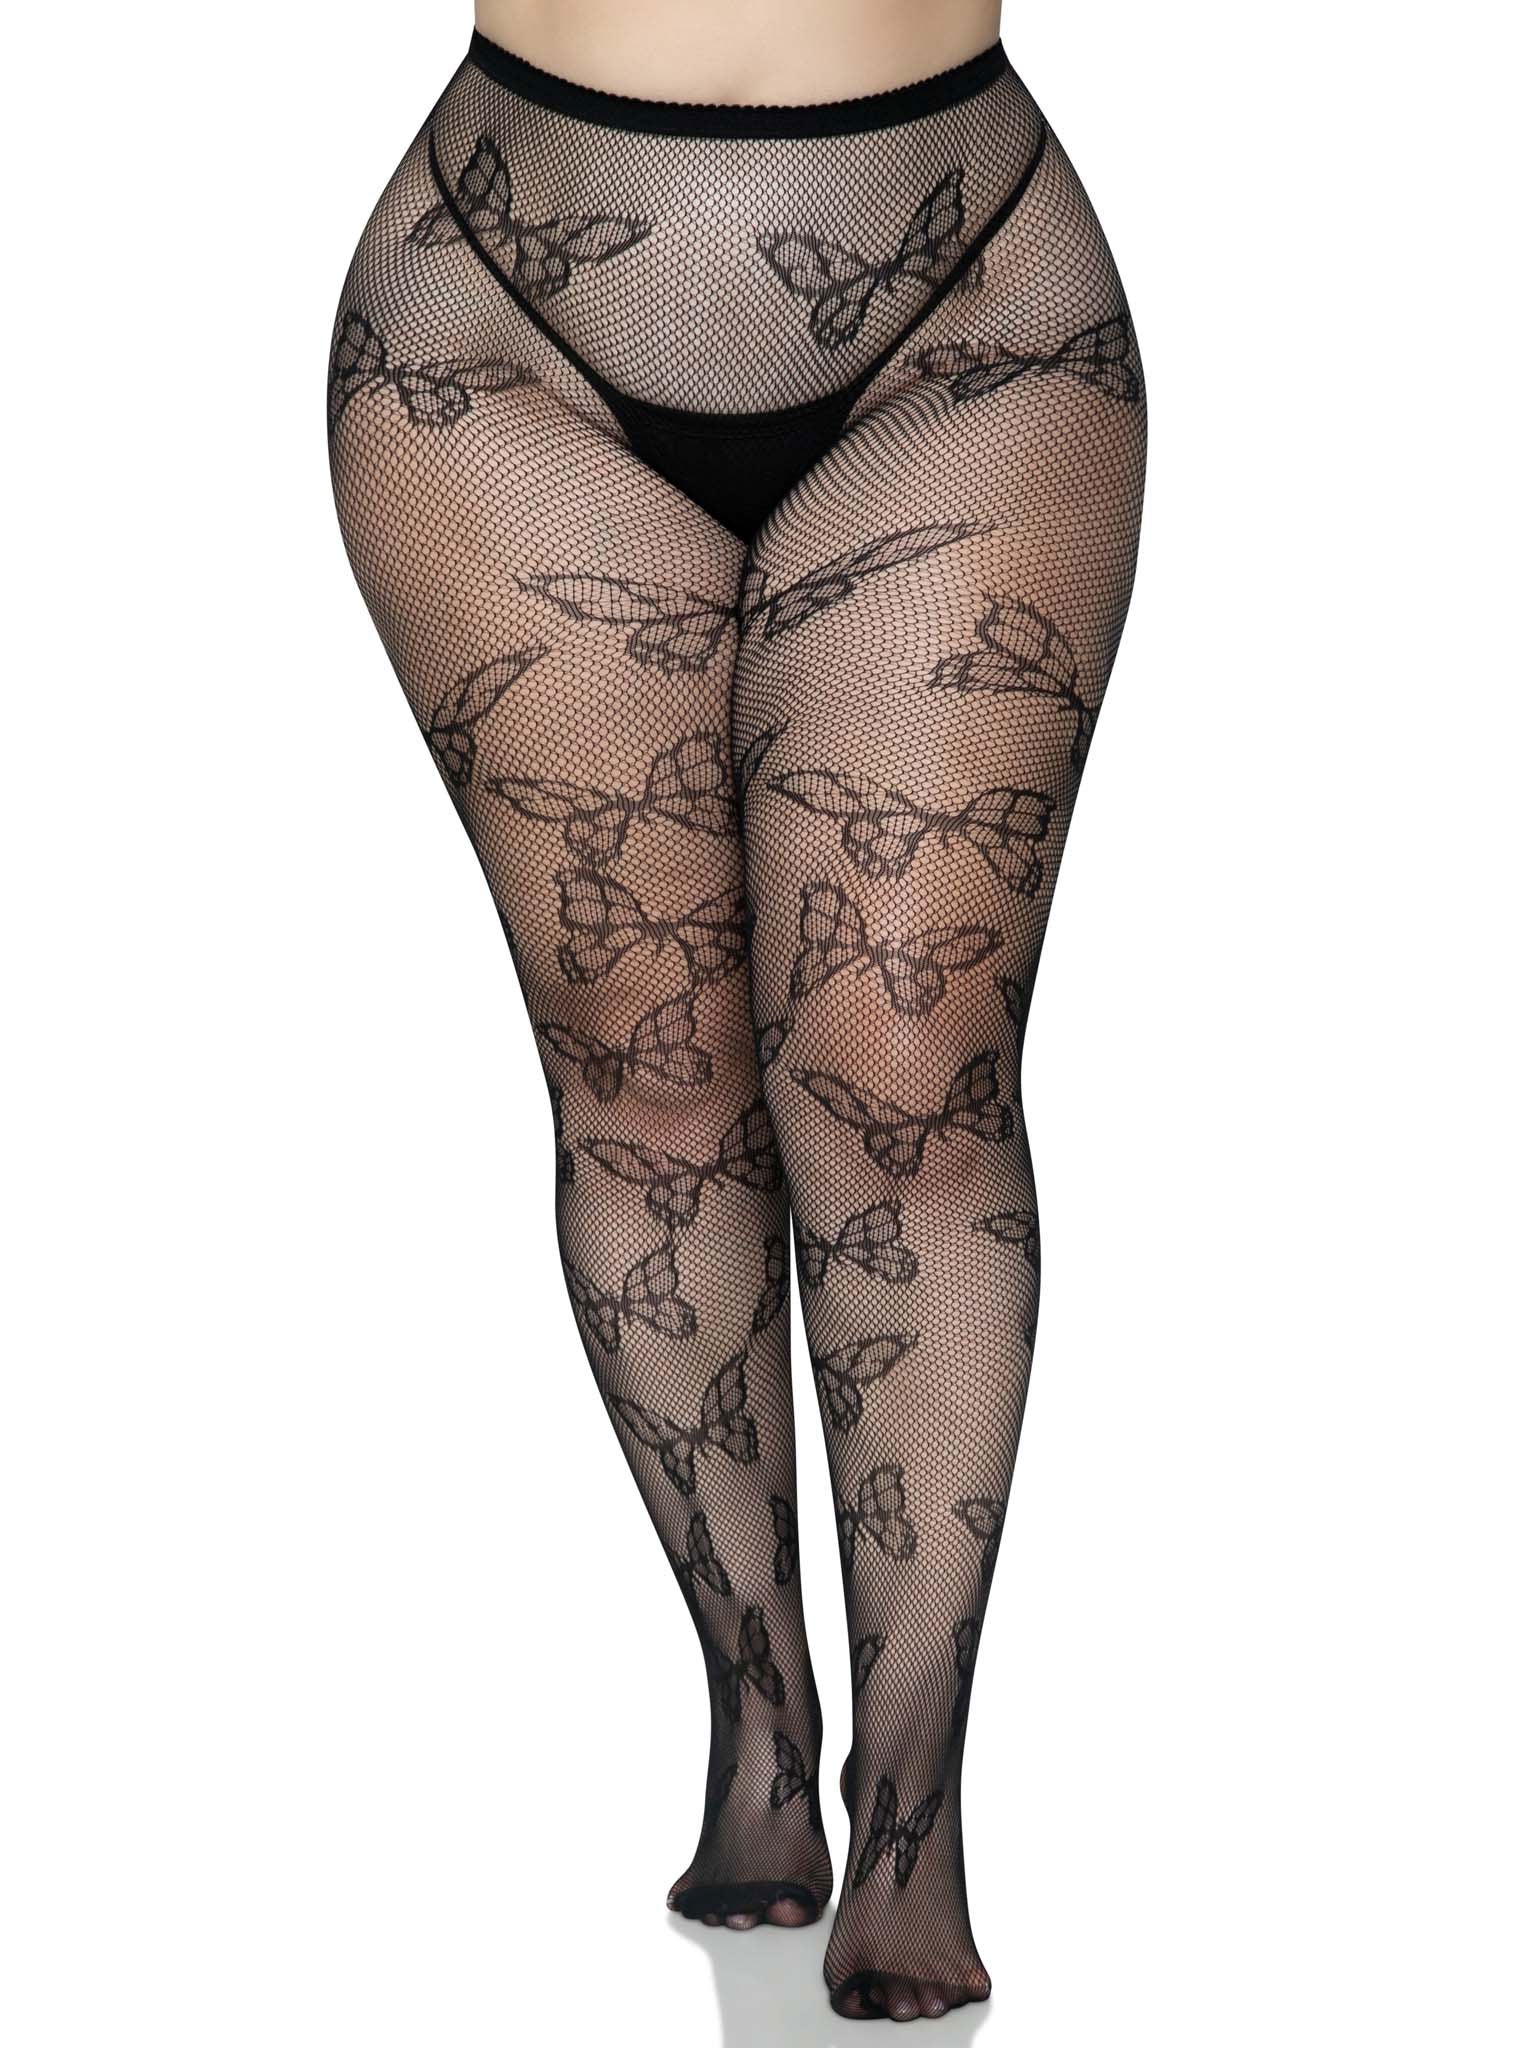 Butterfly Net Tights - One Size Black / 1x/2x